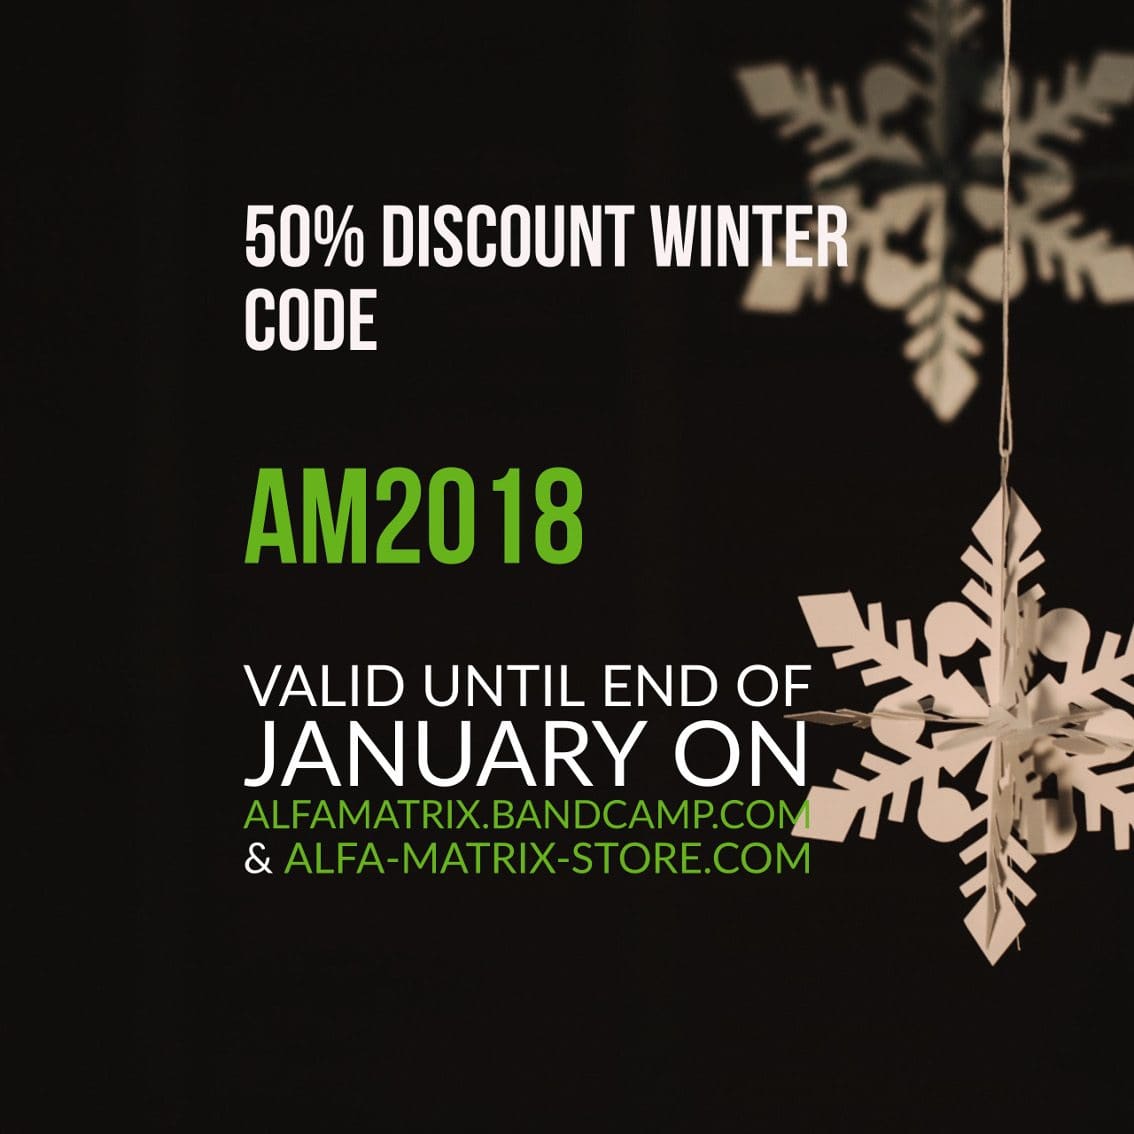 Alfa Matrix enters the new year with special 50% discount campaign - here's your code